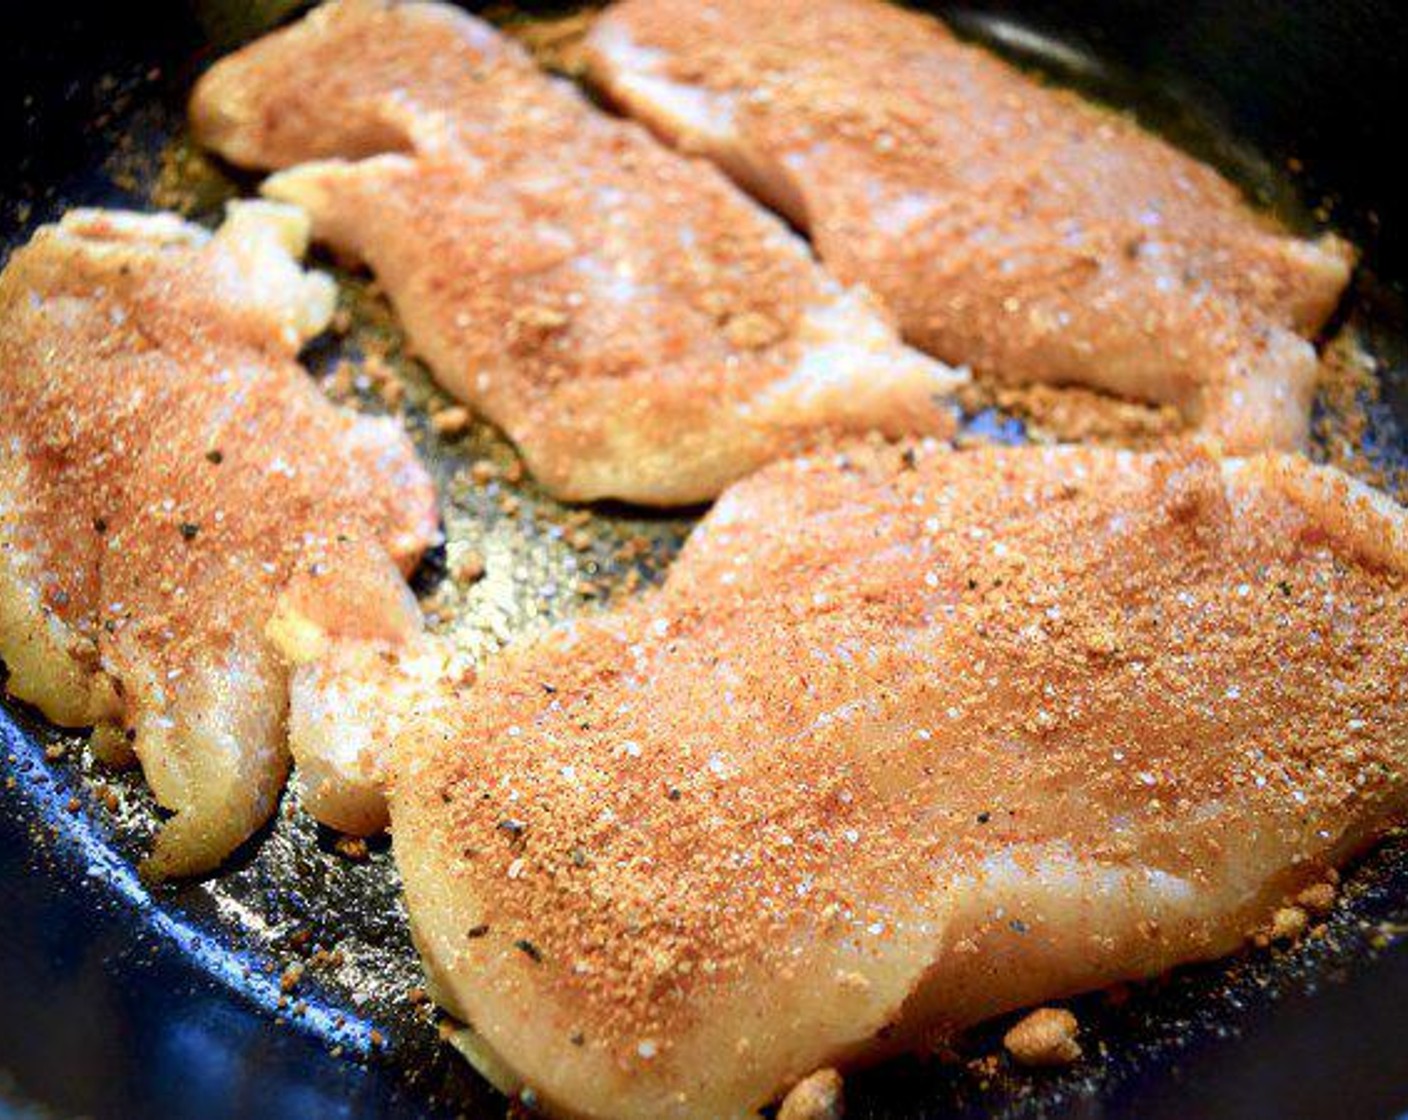 step 3 Reserve 1 tsp of the spice mix and then use the rest of the spice mix to generously coat Tyson® Chicken Breast (1 lb). Once the chicken is seasoned, place it in an oven proof skillet and set aside.